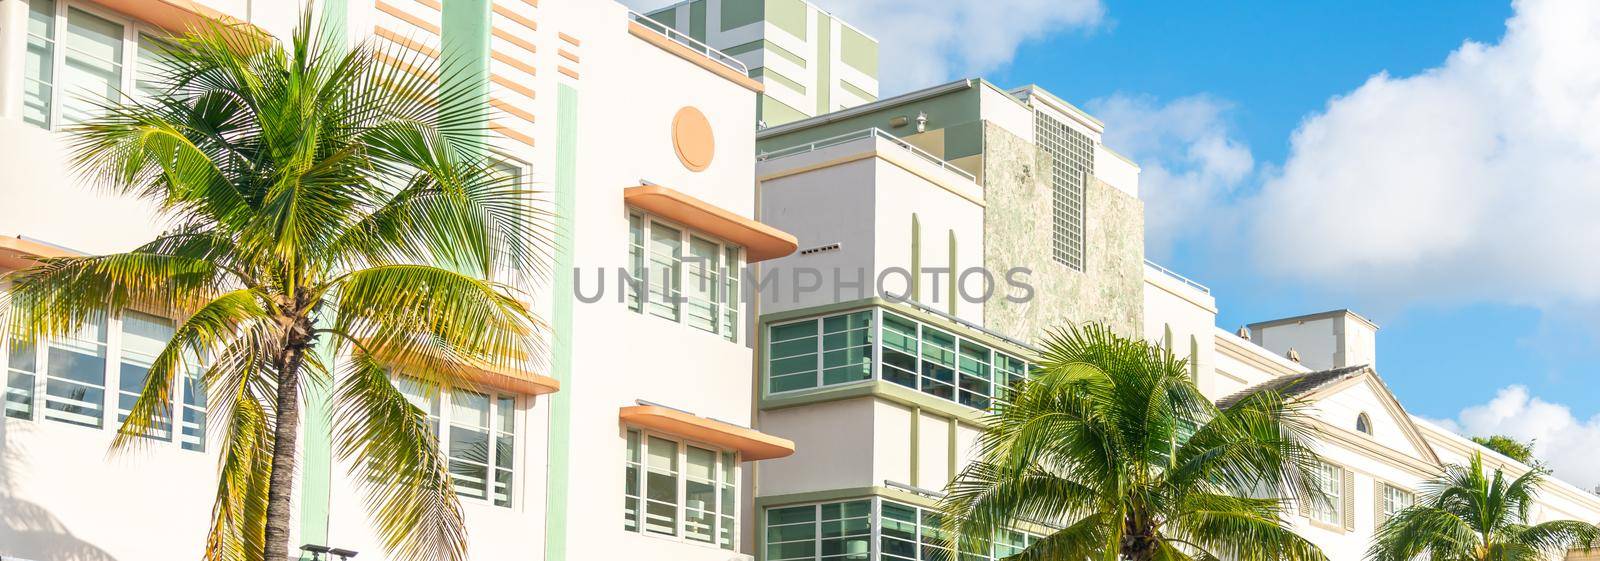 Art Deco building in the Art Deco District in South Beach, Miami by Mariakray